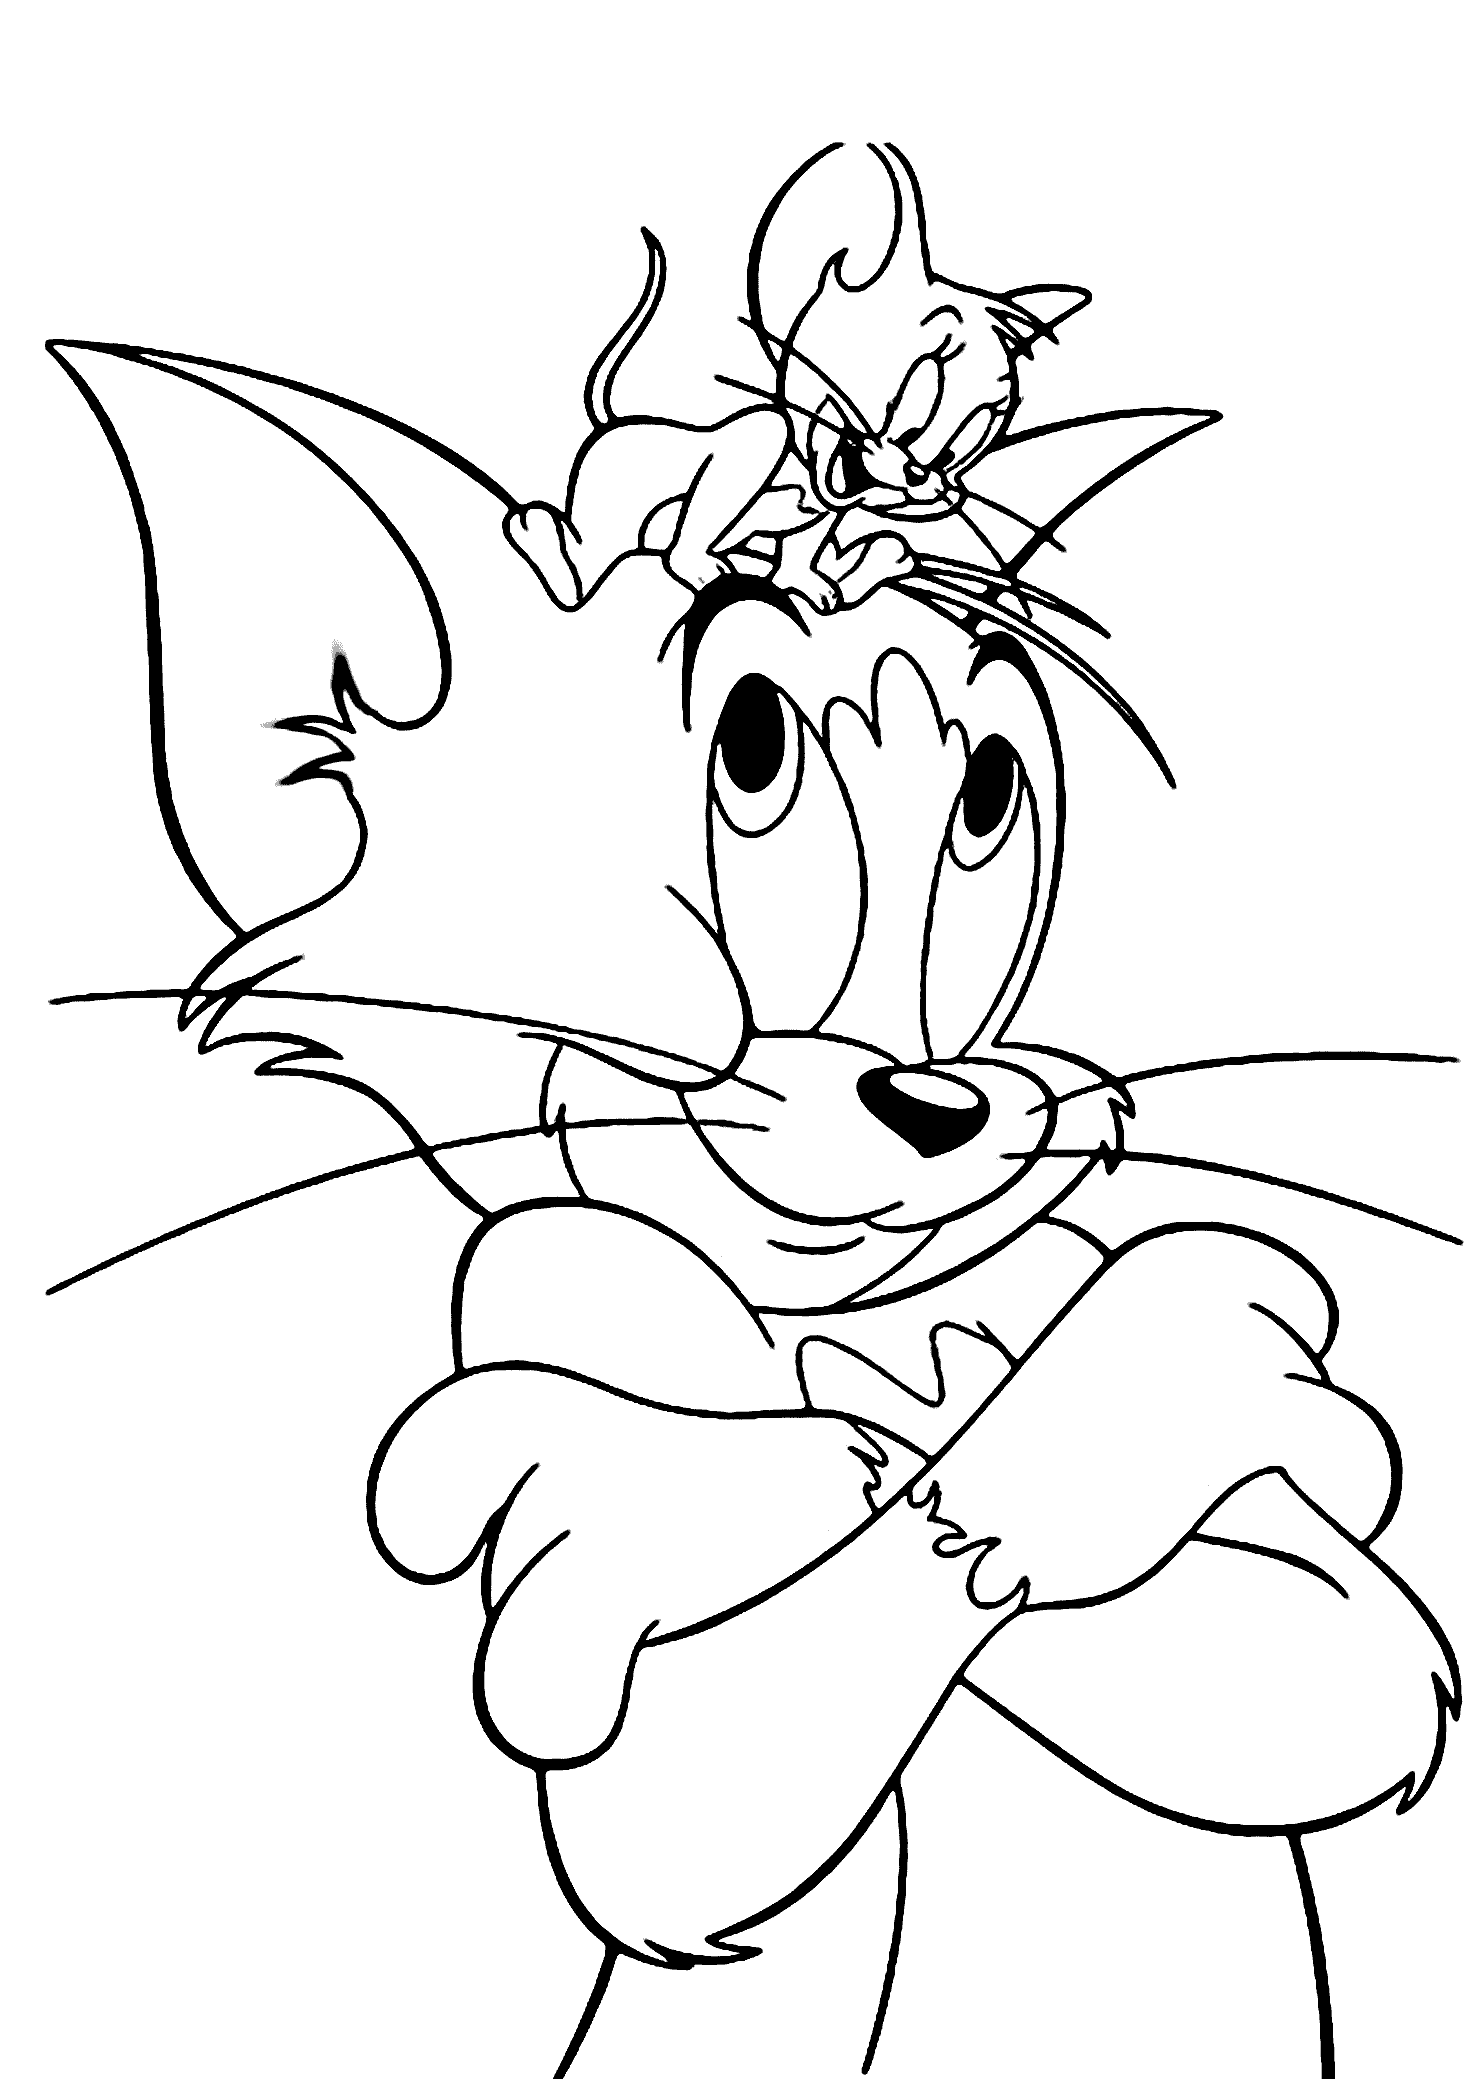 tom and jerry coloring page tom and jerry coloring pages for kids printable free and coloring page tom jerry 